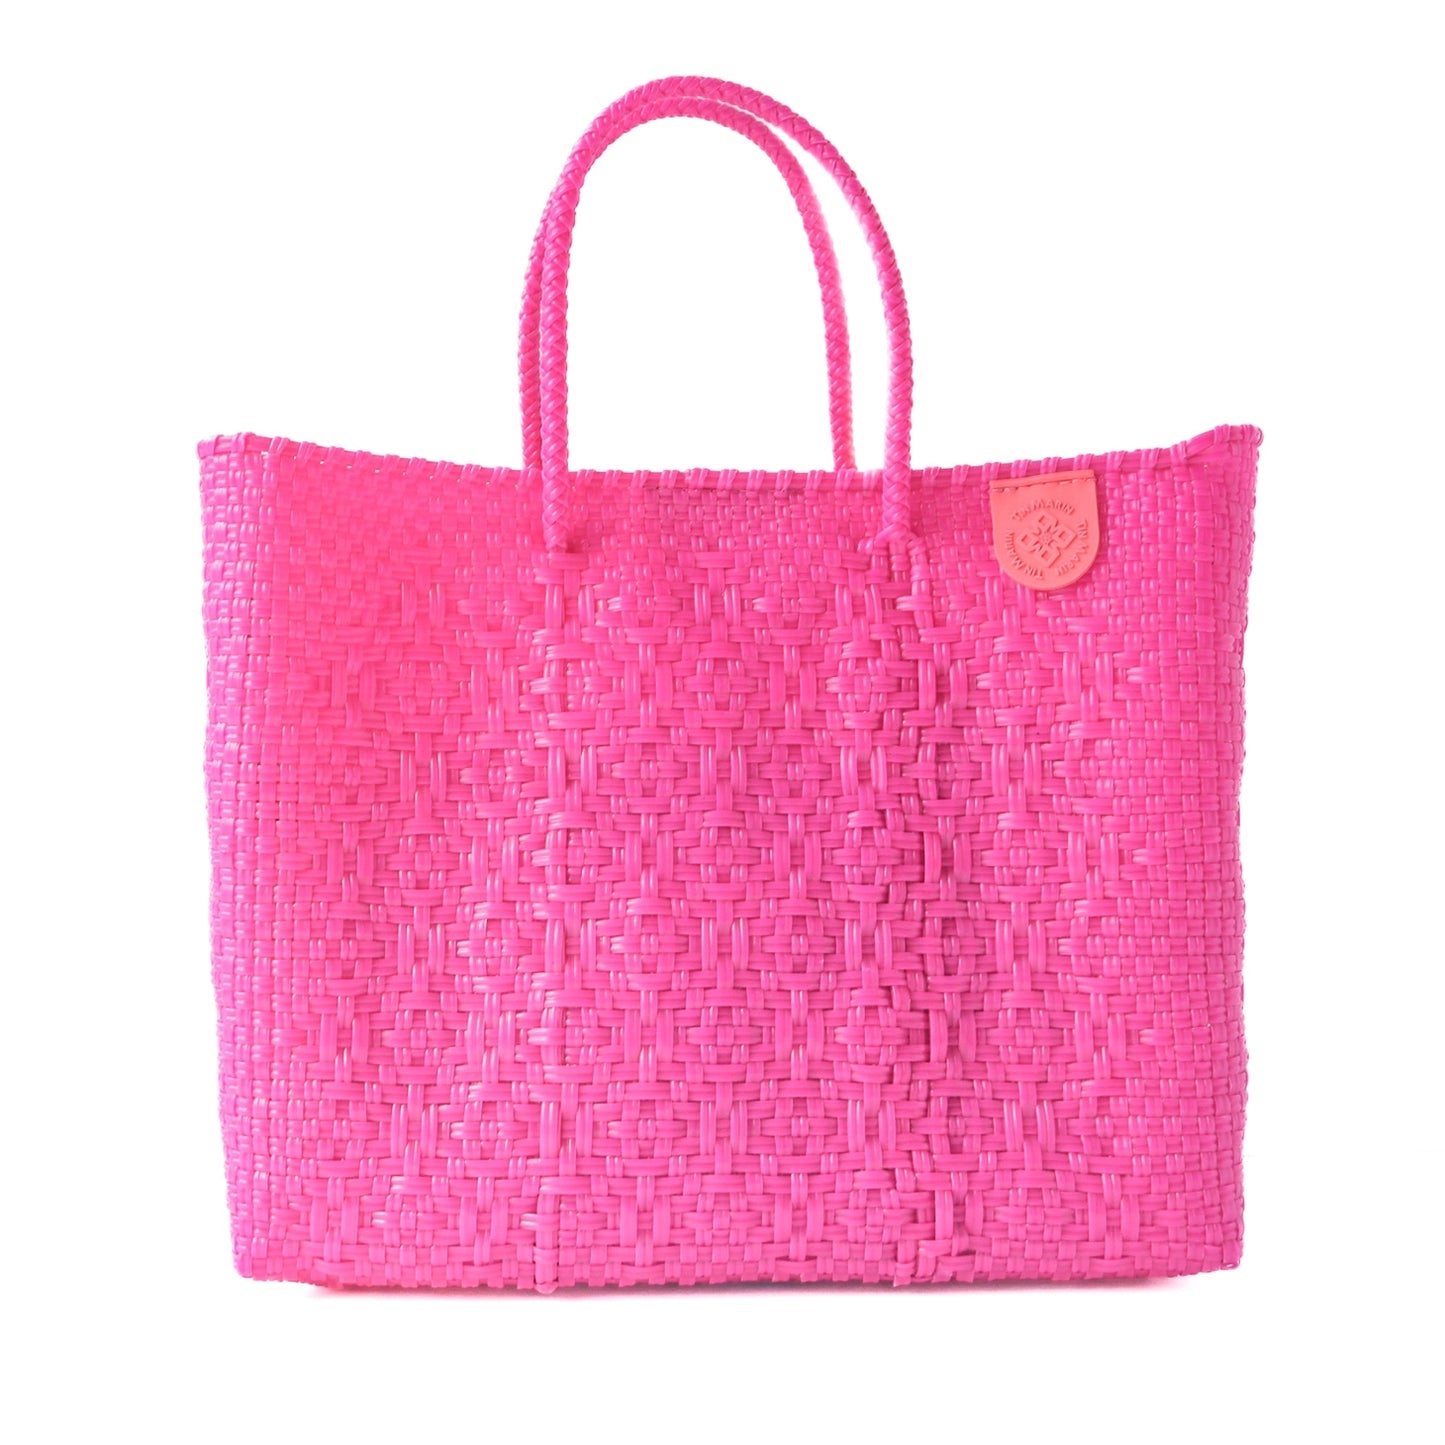 Hand Woven 100% Recycled Plastic Bag - Hot Pink